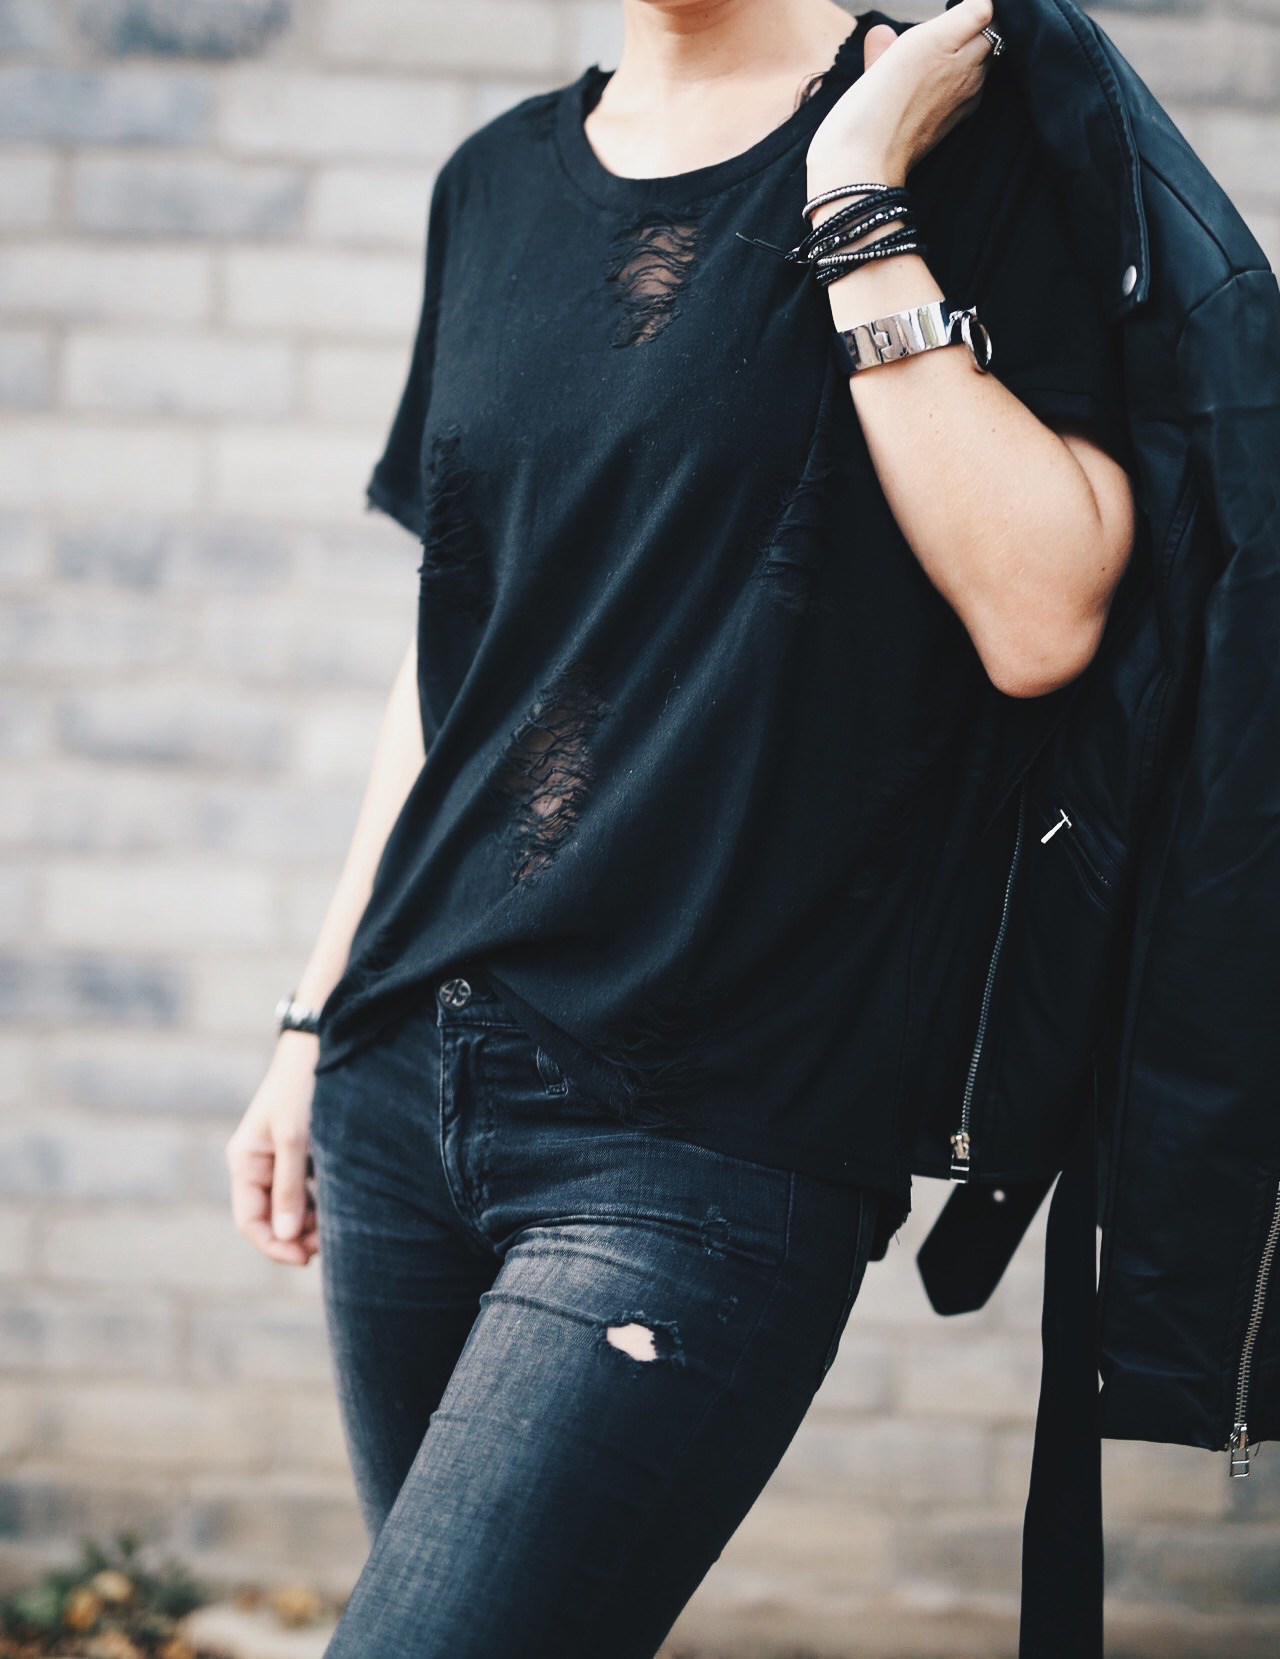 Distressed Black Tee + Denim | how to style a distressed tee | how to wear a distressed tee | distressed tee style tips | fall tees | tees for fall and winter | fall fashion tips | fall outfit ideas | fall style tips | what to wear for fall | cool weather fashion | fashion for fall | style tips for fall | outfit ideas for fall || Dressed to Kill  #distressedtee #blacktee #distressed